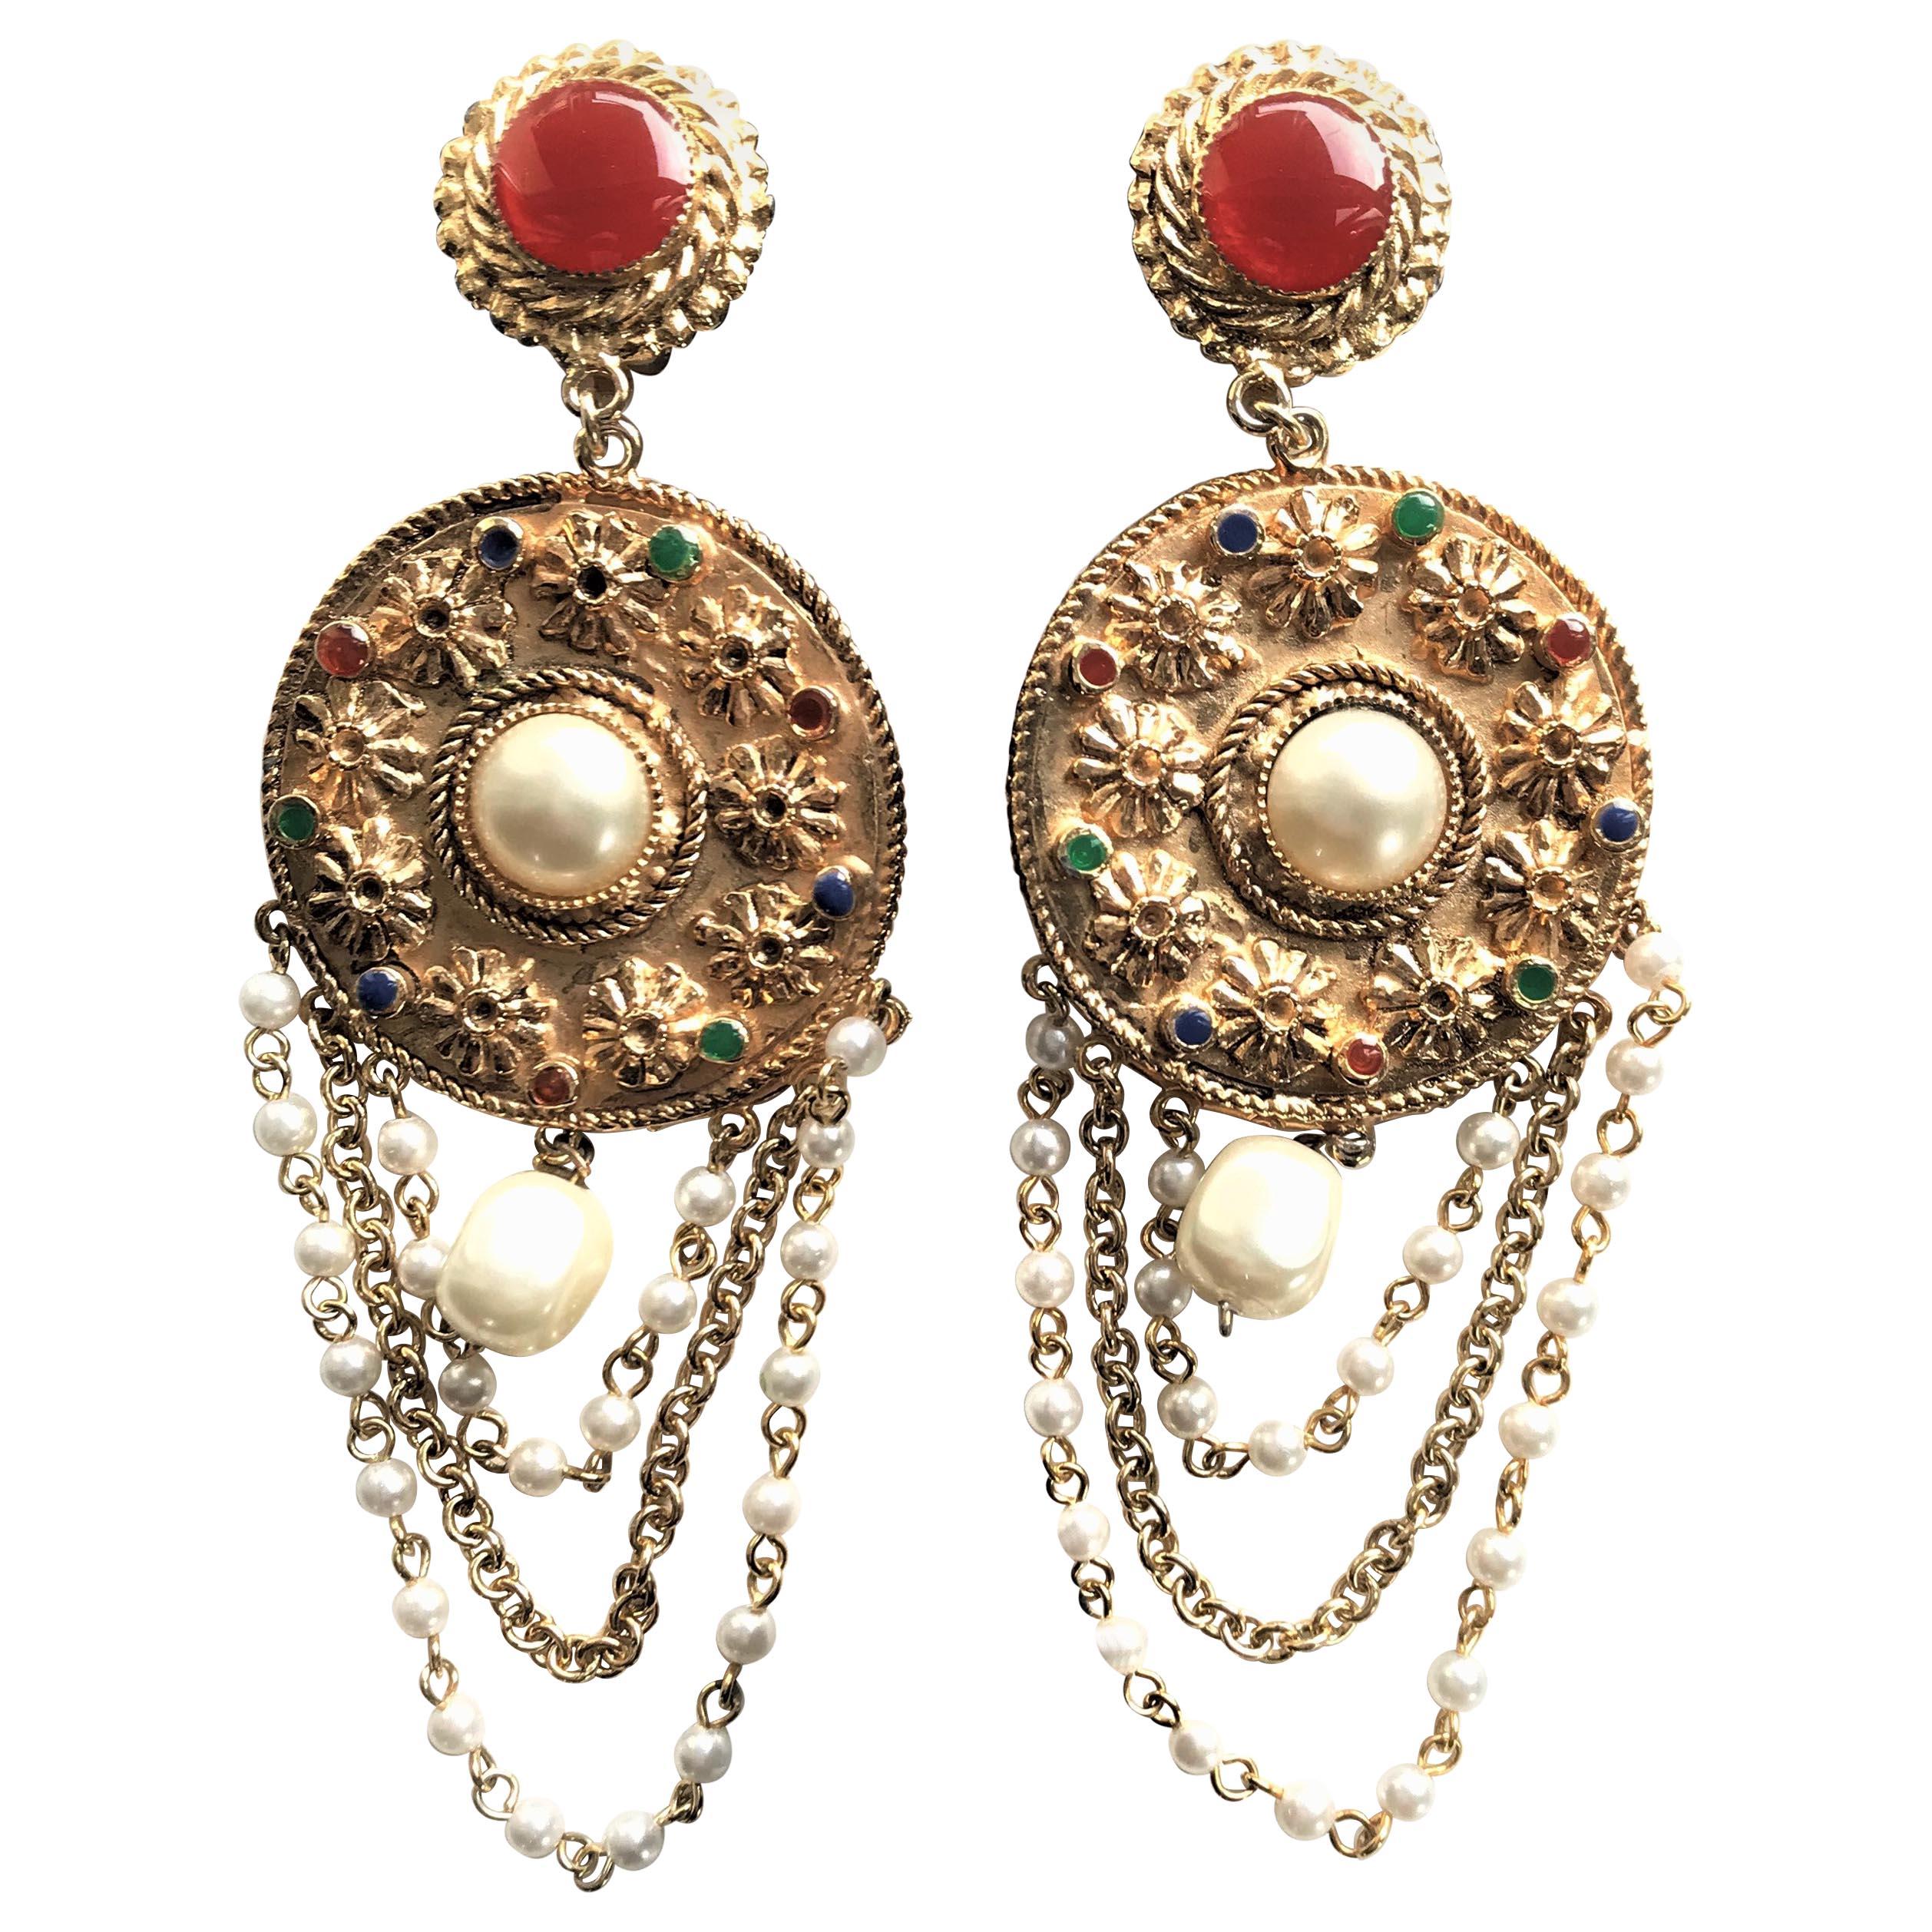  A decorative unsigned ear clip gold-plated with false pearls and chains, France For Sale